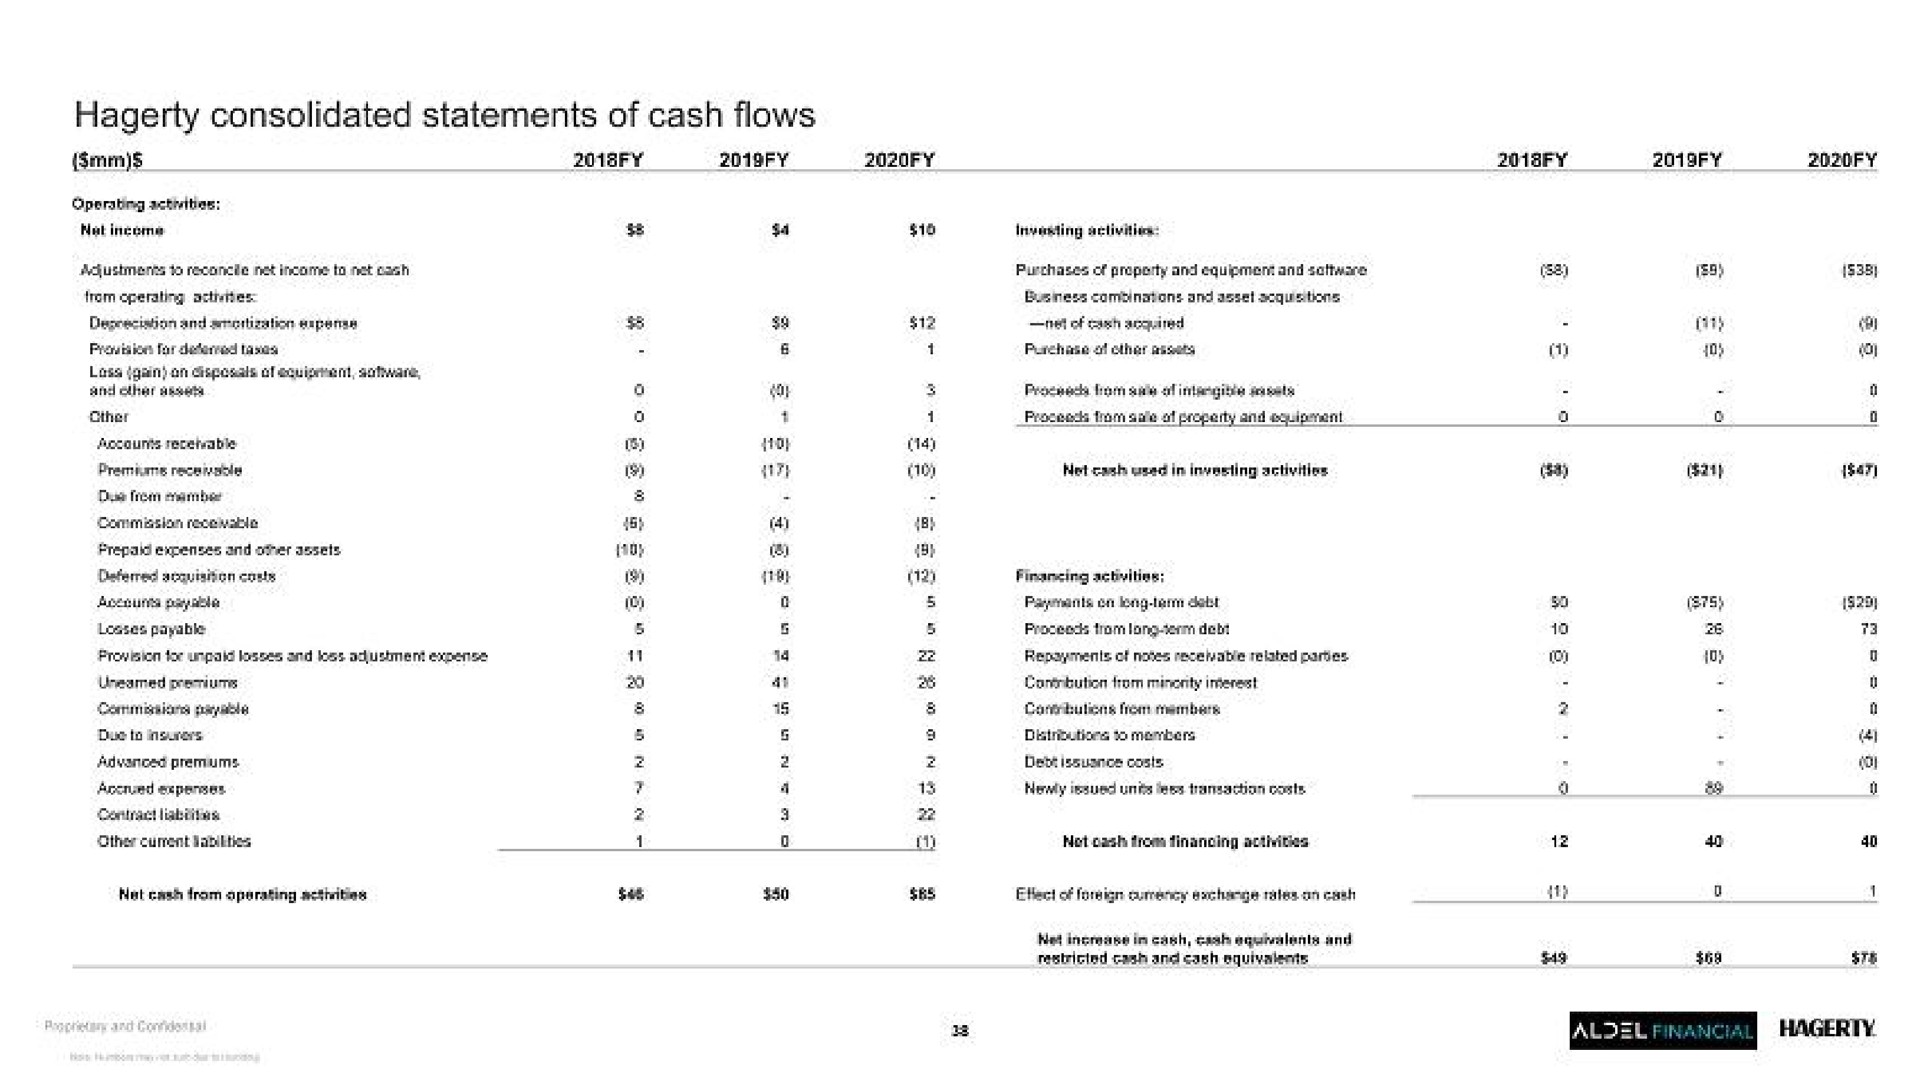 consolidated statements of cash flows | Hagerty